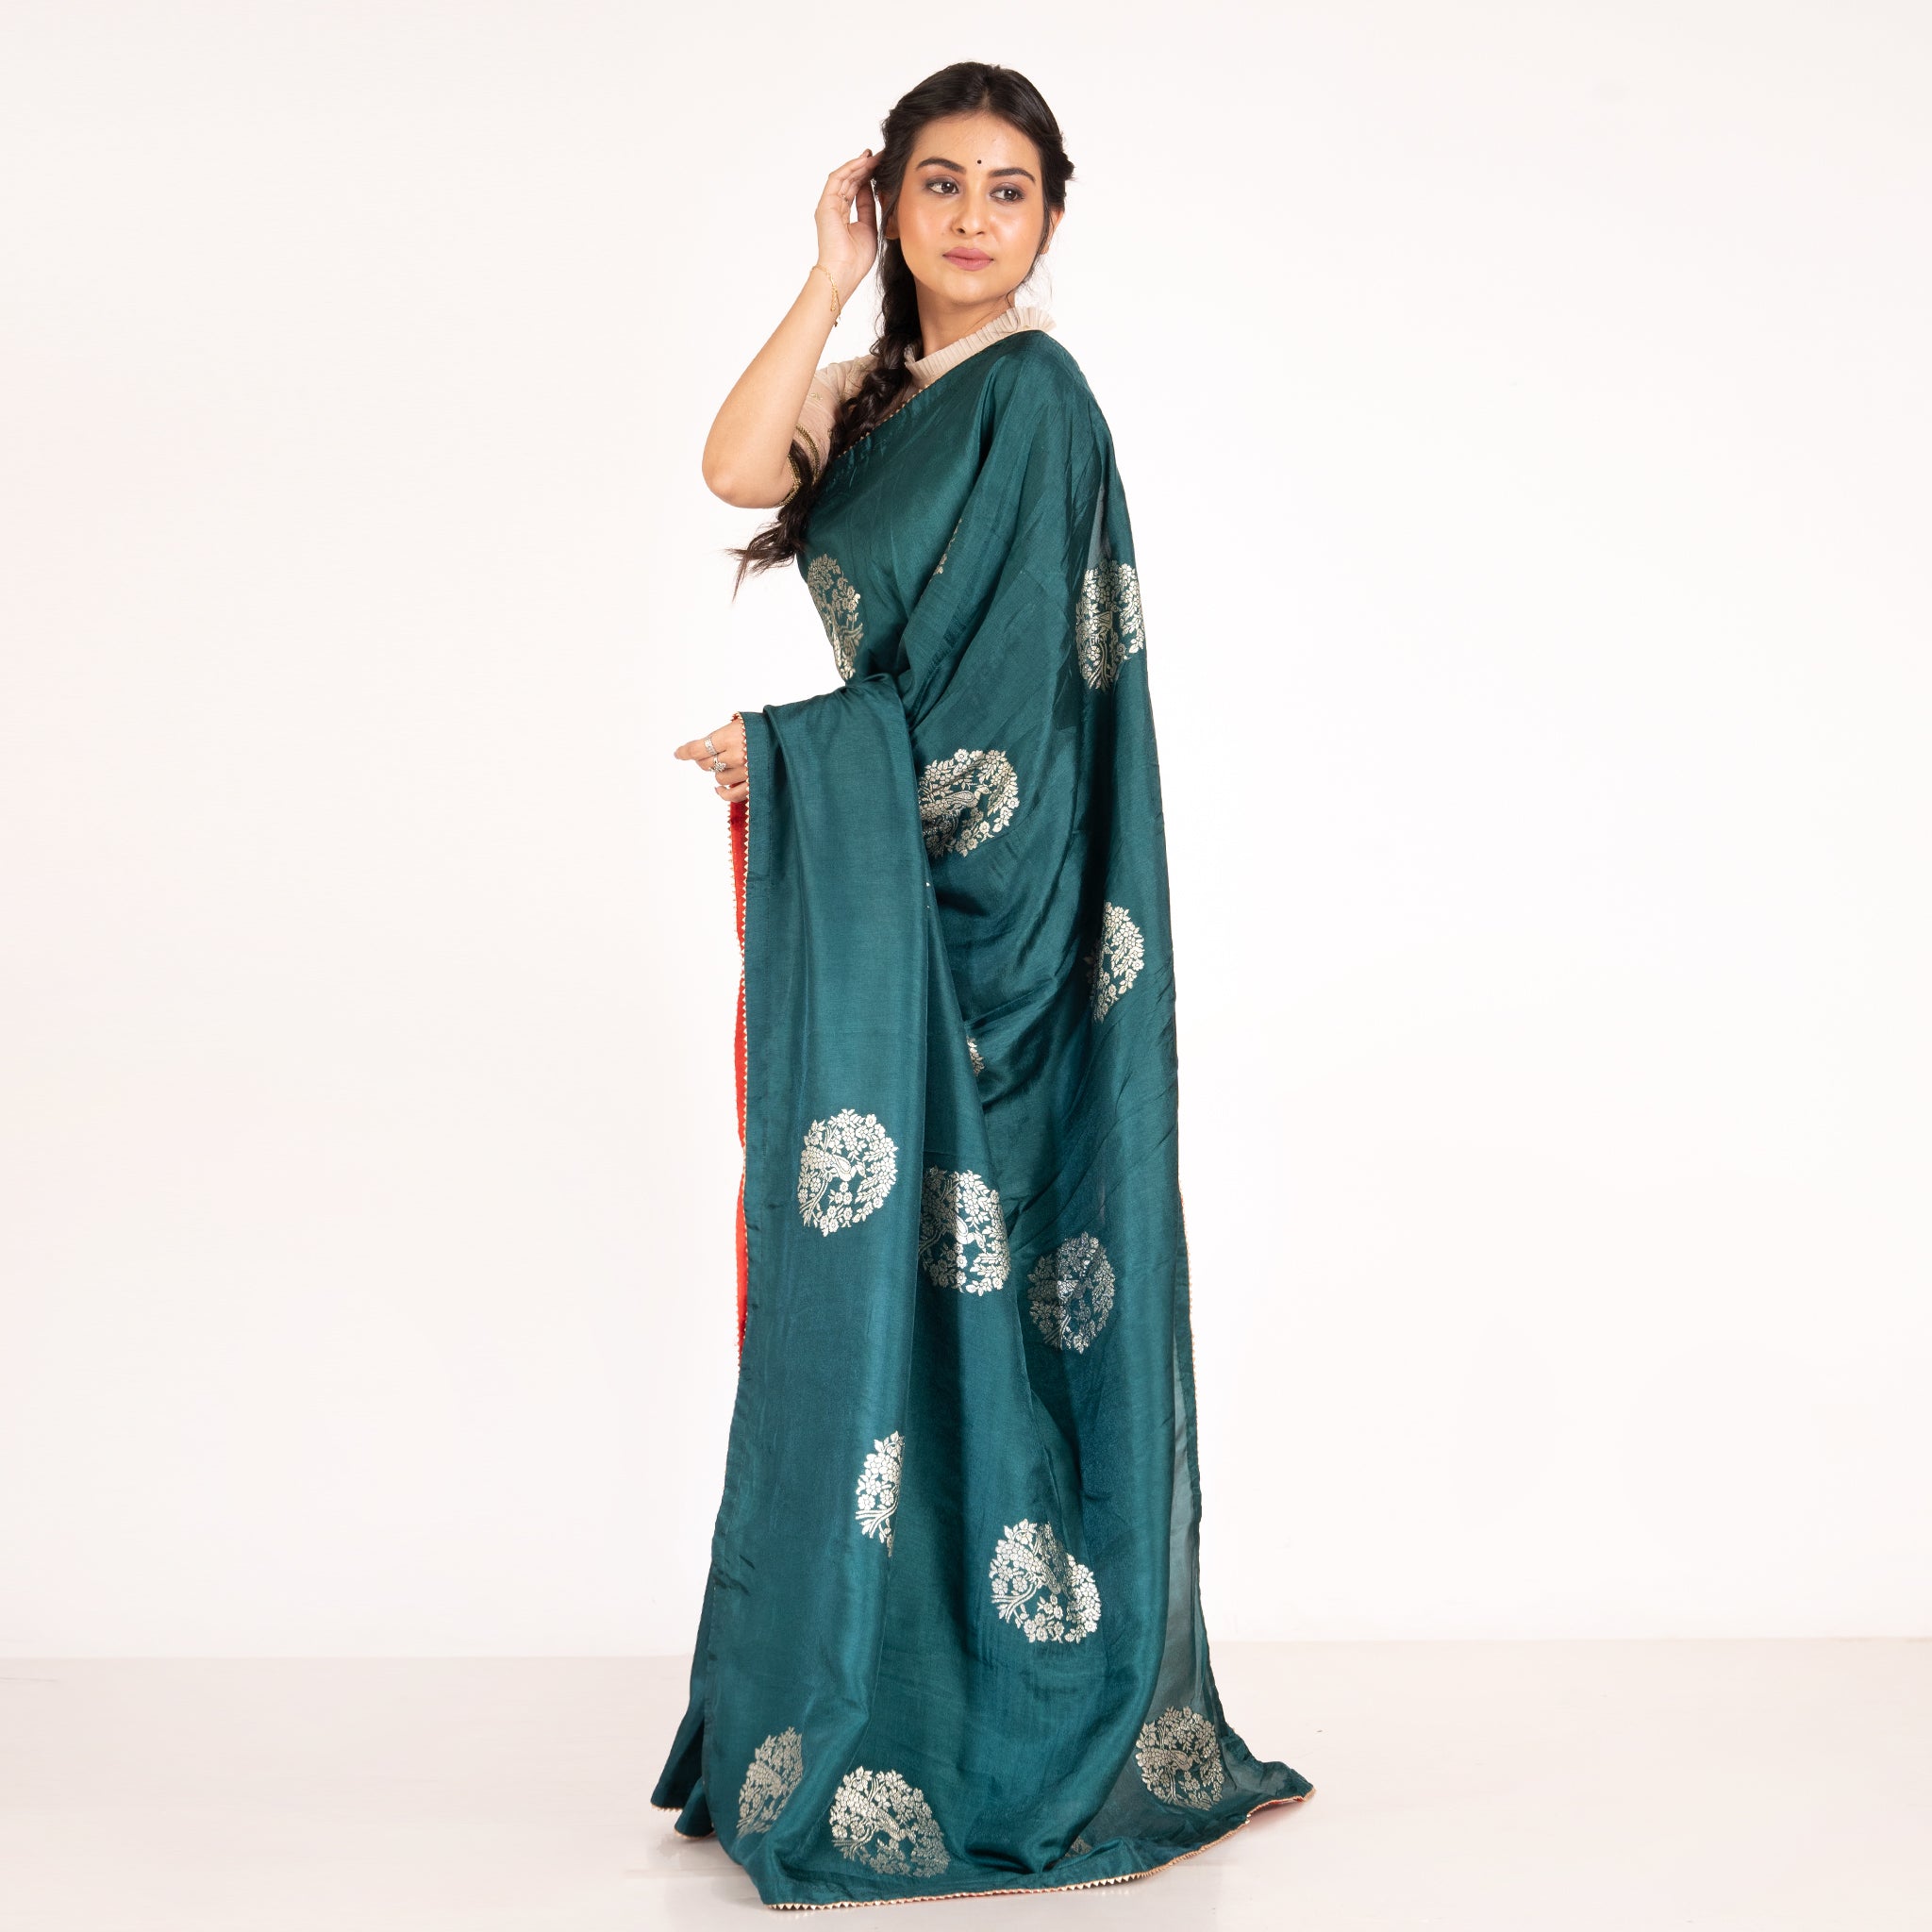 Women's Teal Dola Silk Saree With Woven Vriksh Zari Motifs And Contrasting Backing Border - Boveee